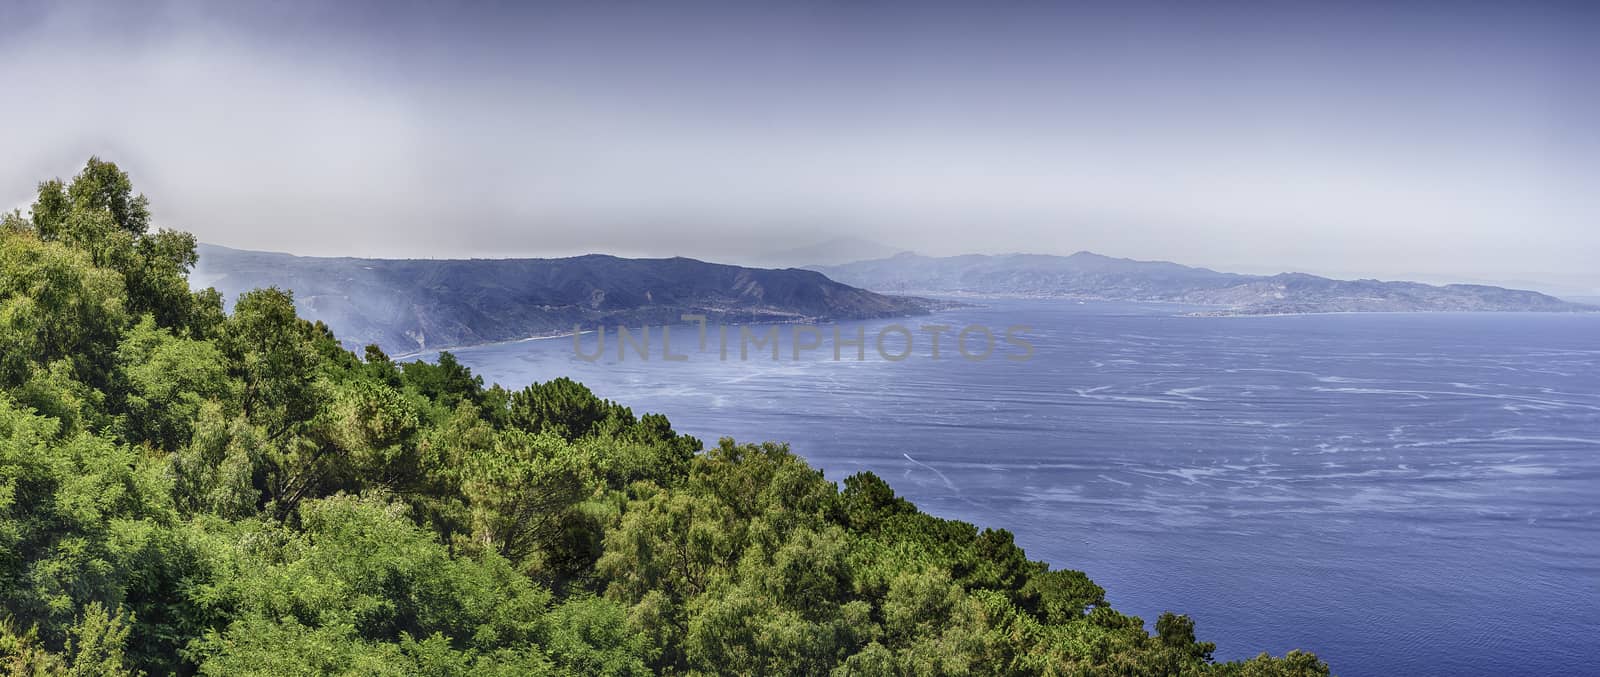 Aerial view of the Strait of Messina, Italy by marcorubino